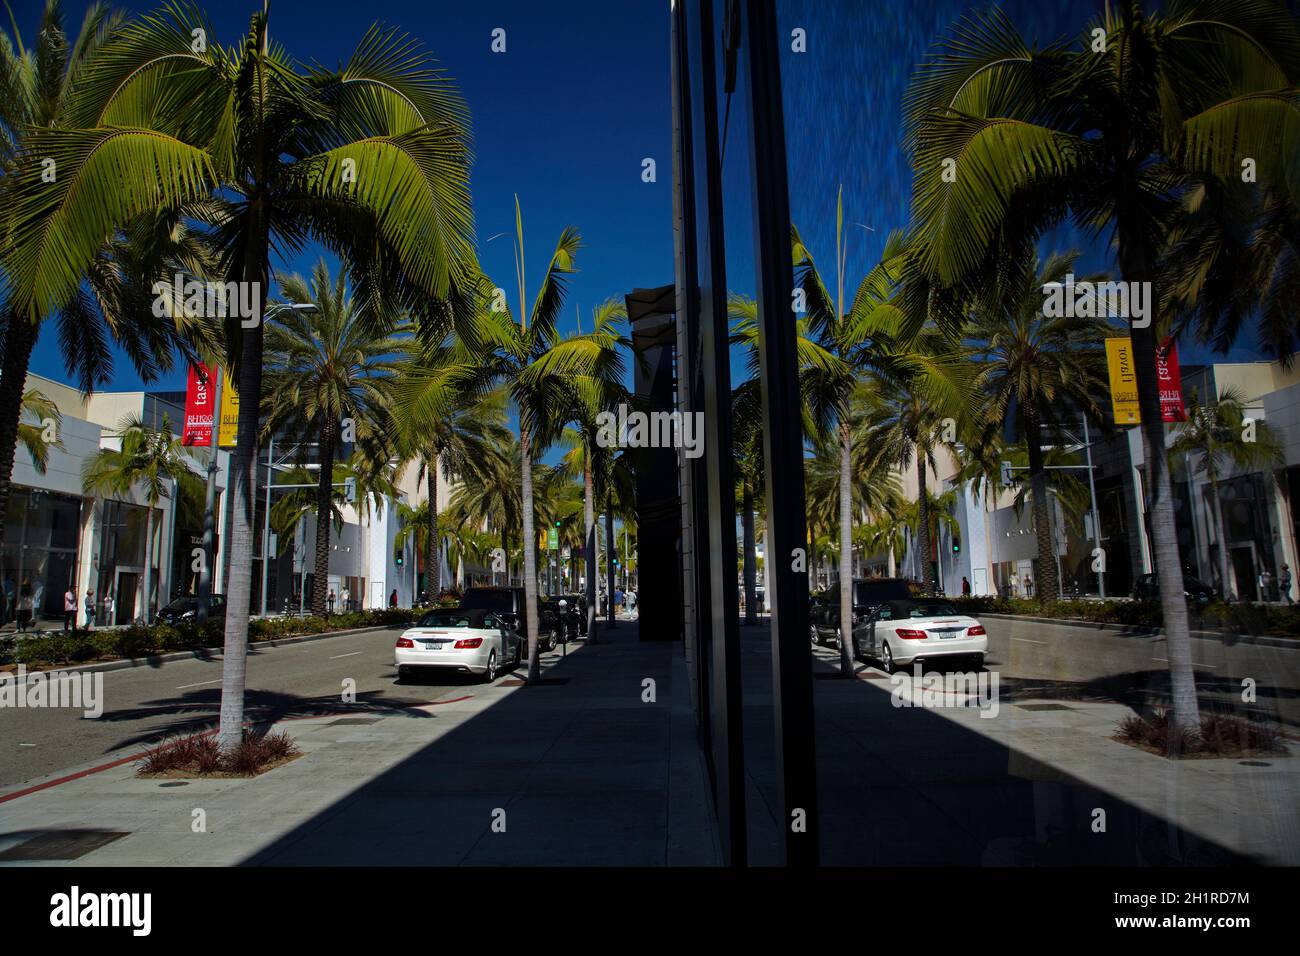 Palm Trees and window reflection, Rodeo Drive, strada dello shopping di lusso a Beverly Hills, Los Angeles, California, USA Foto Stock